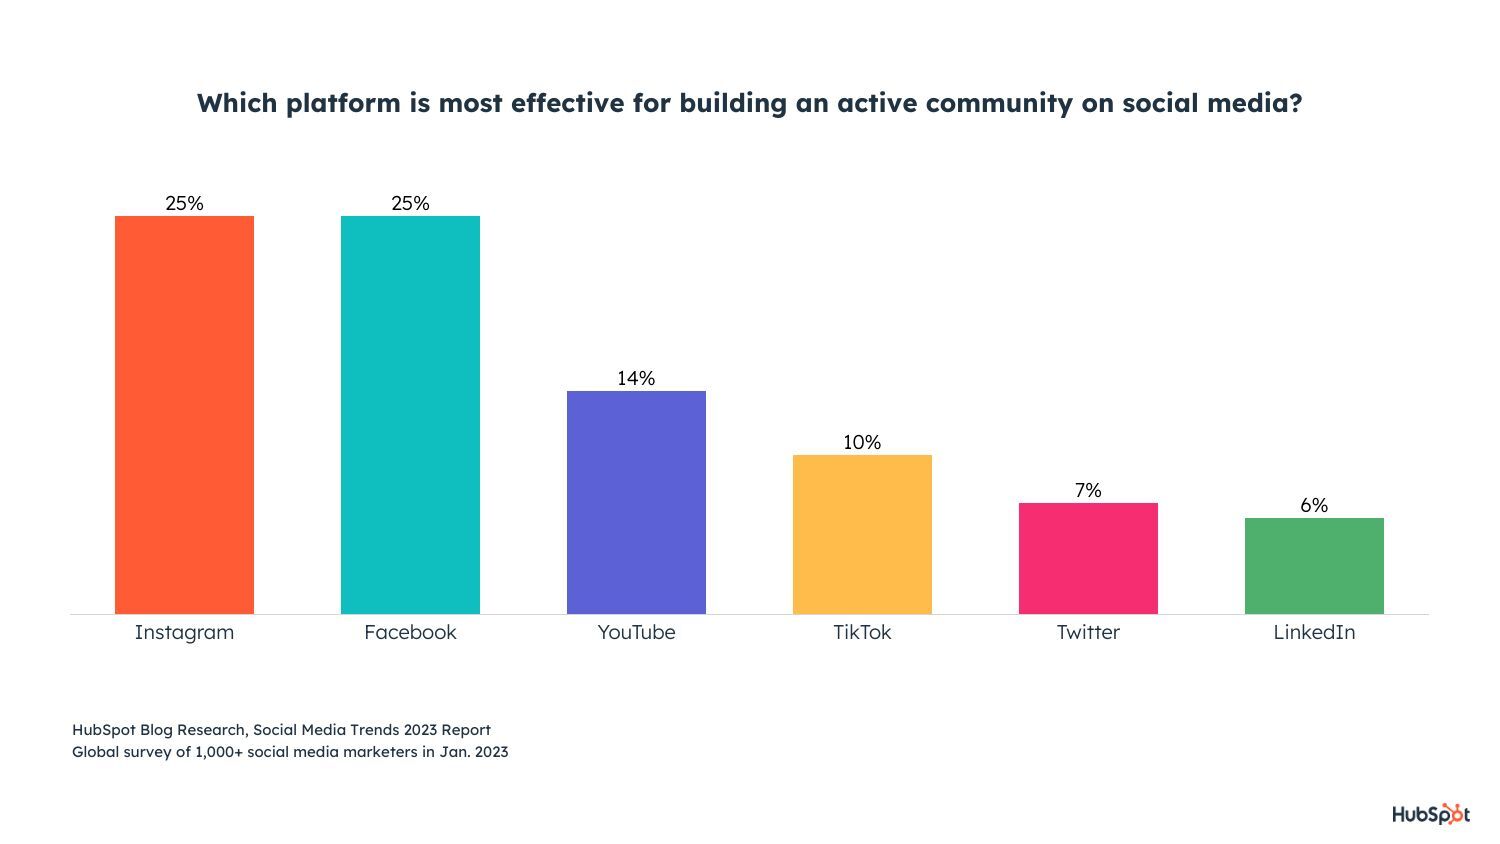 which platform is most effective for building social communities